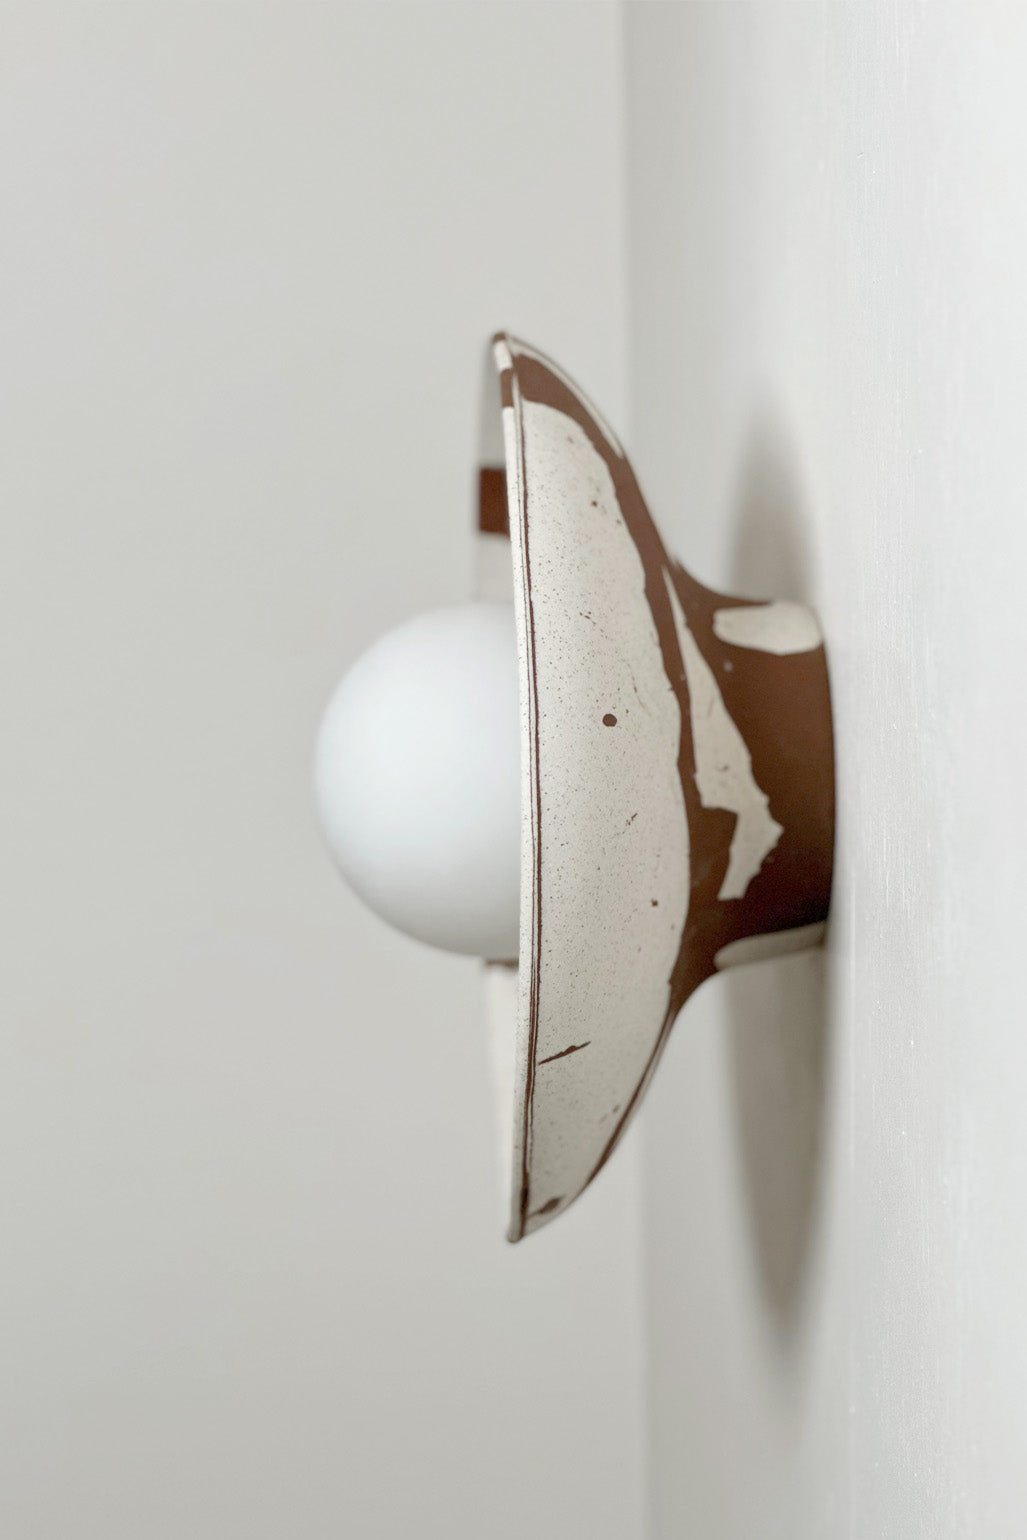 Limited Edition One Made Ceramic Wall Dish Sconce